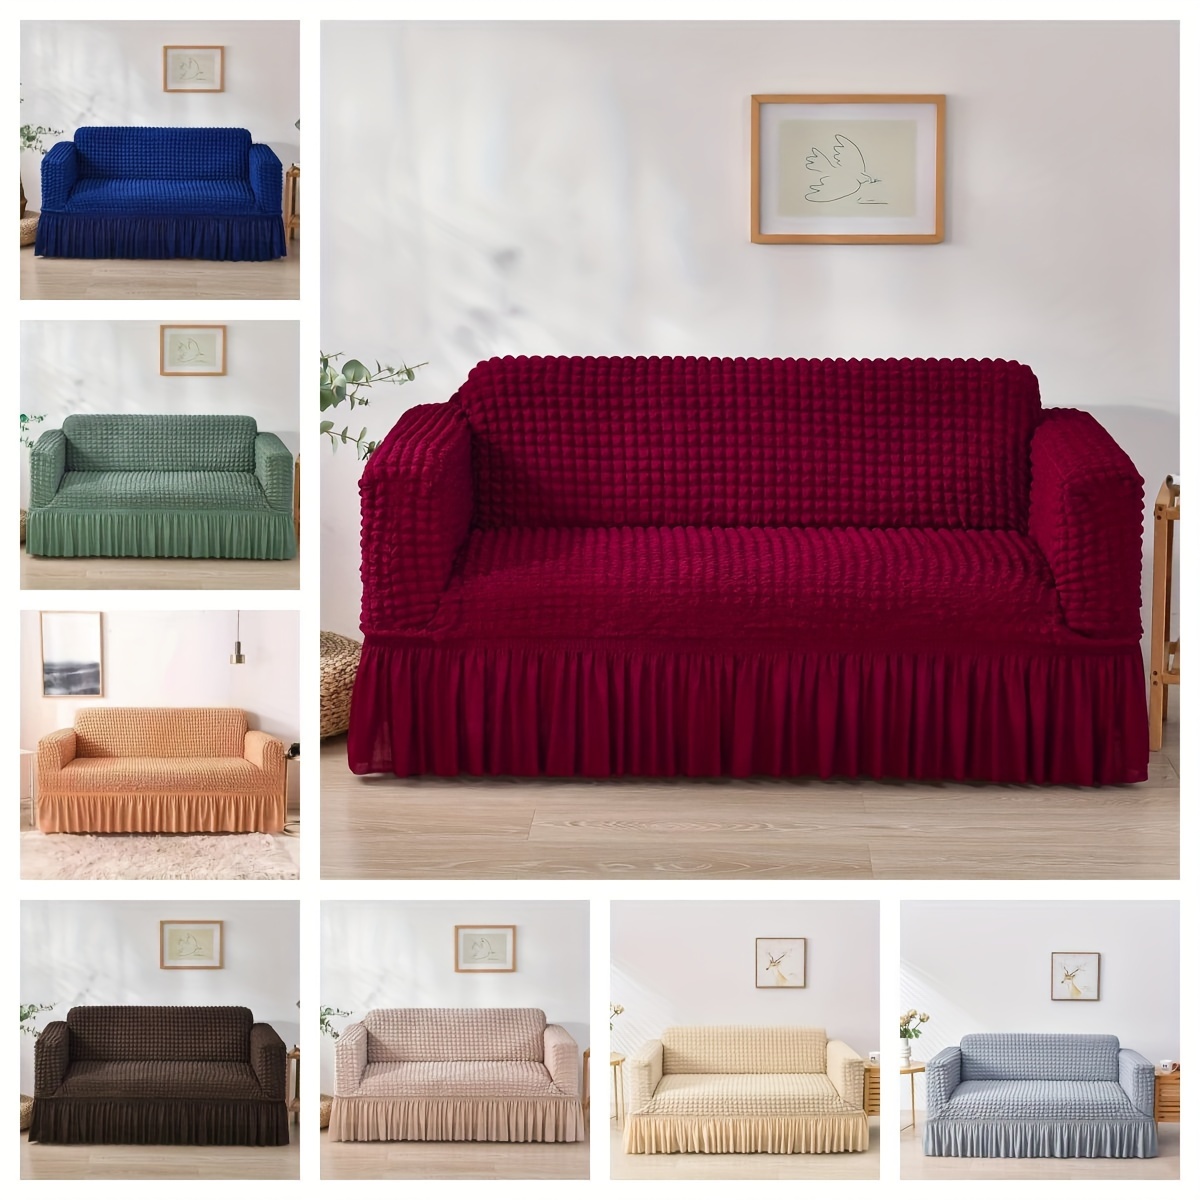 

1pc Solid Color Seersucker Couch Cover, Sofa Slipcover Skirt Style Sofa Cover, Elastic And Durable Stretch Furniture Protective Cover For Bedroom Office Living Room Home Decor